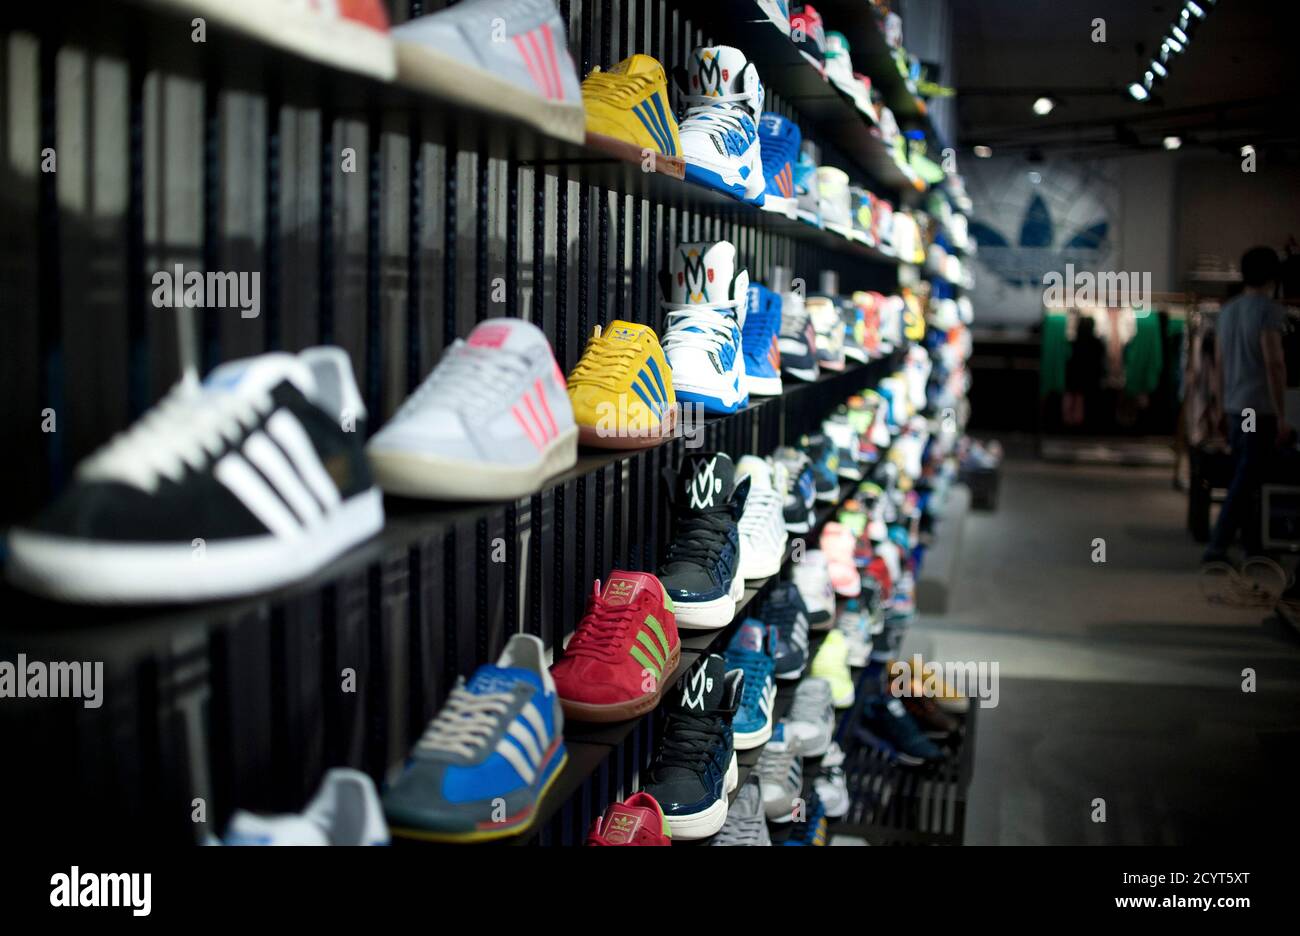 hoy Ten cuidado pastor Adidas Original shoes are pictured before the opening at the new Adidas  Originals store in Berlin, March 27, 2014. Adidas has launched a new store  blueprint for its Originals fashion brand with